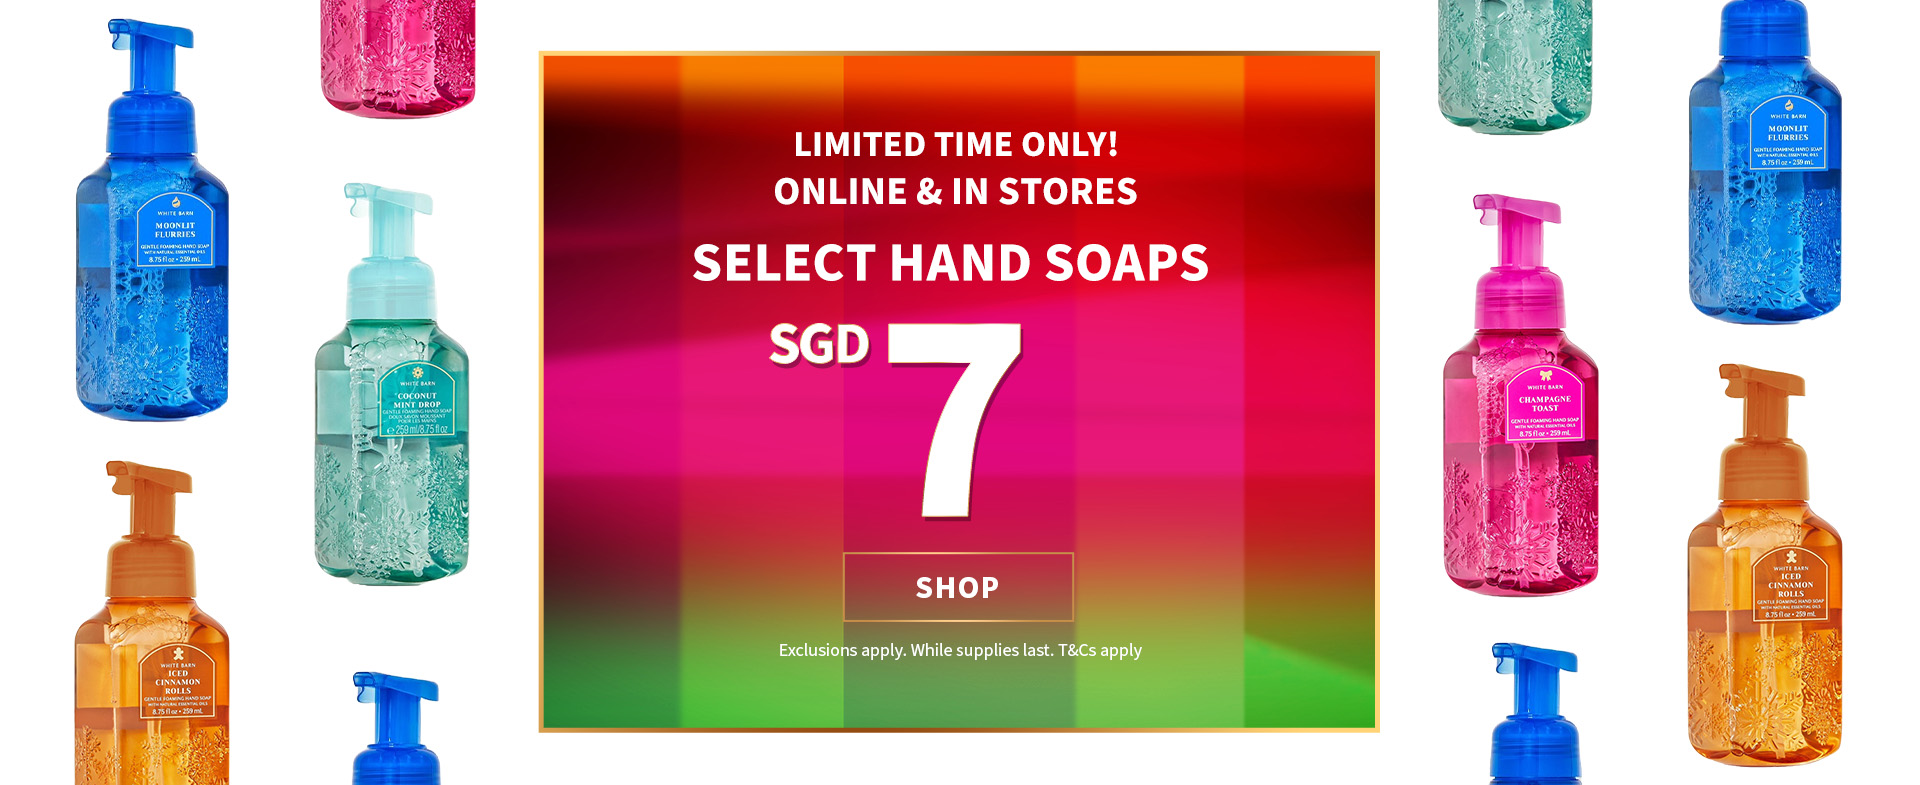 LIMITED TIME ONLY! ONLINE & IN STORES SELECT HAND SOAPS